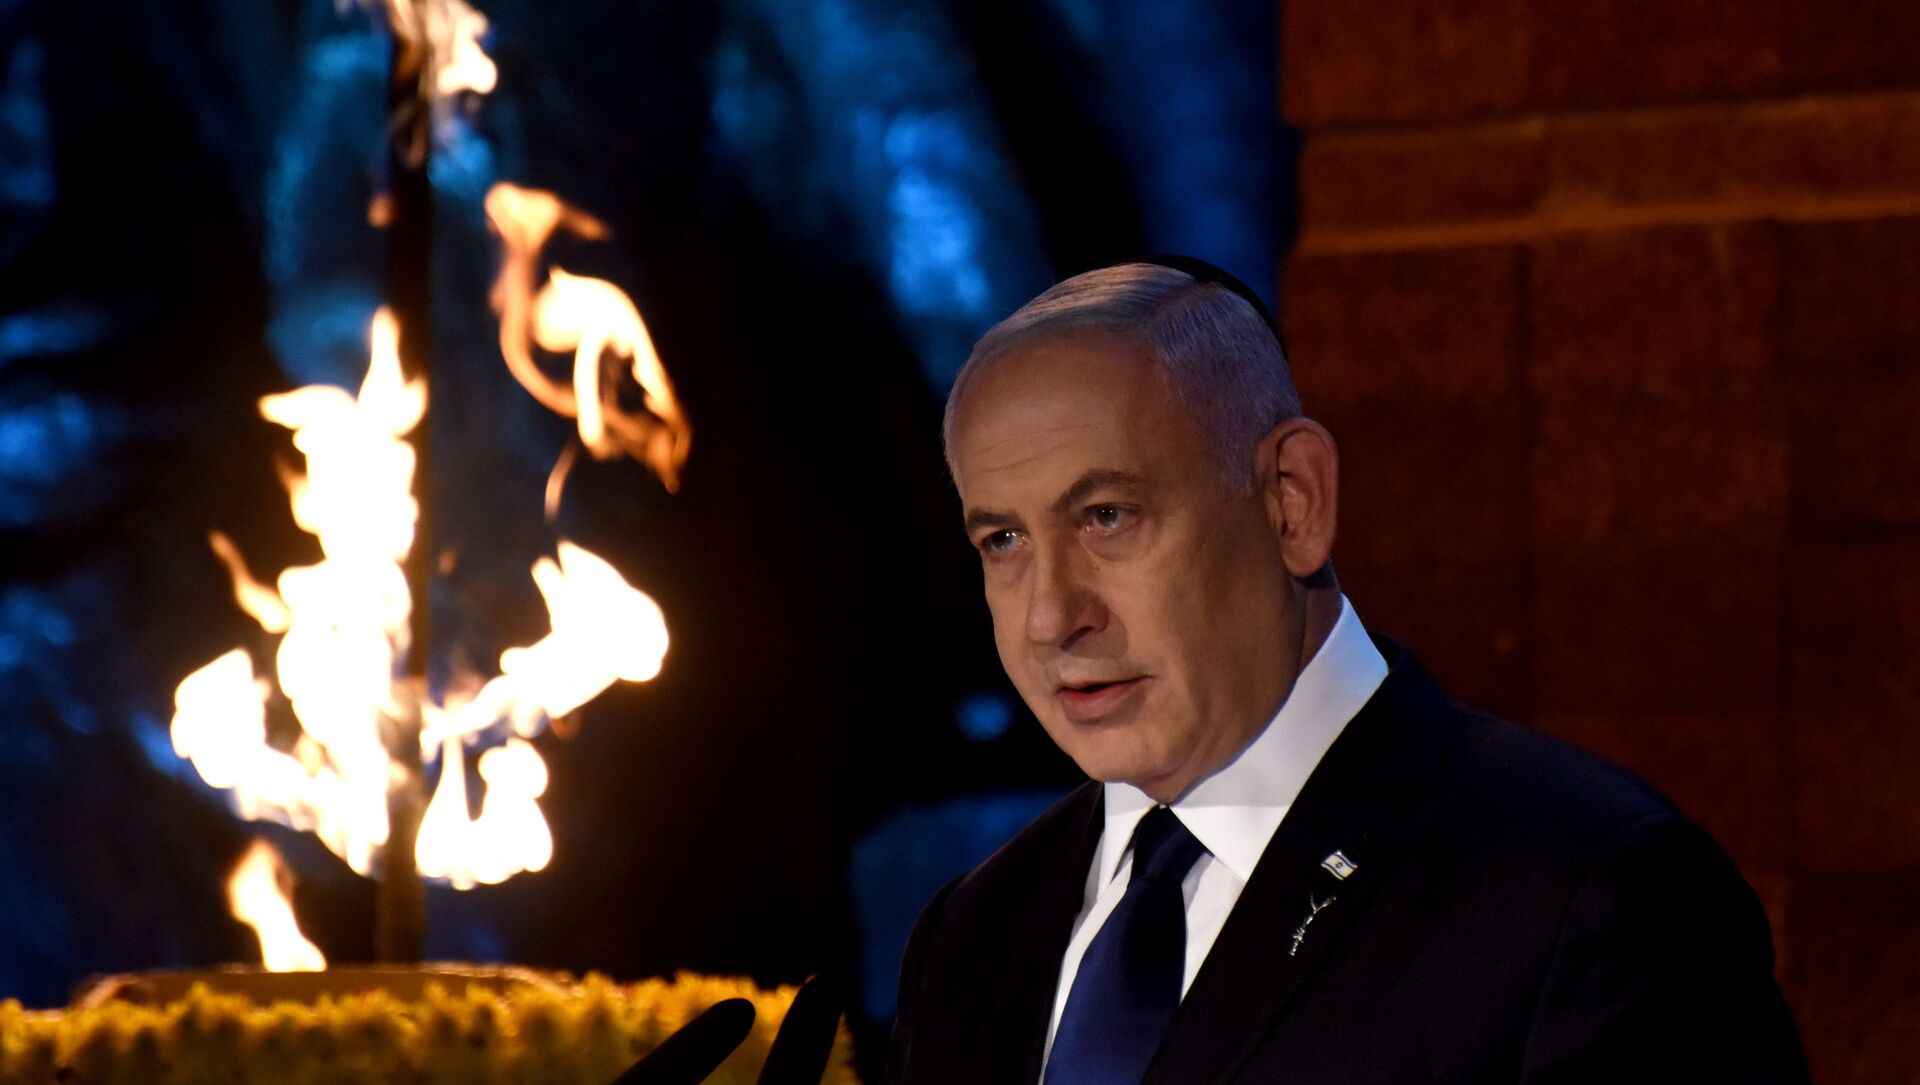 Israeli Prime Minister Benjamin Netanyahu delivers a speech at the Holocaust Martyrs' and Heroes Remembrance Day opening ceremony in memory of the six million Jewish men, women and children murdered by the Nazis and their collaborators, at Yad Vashem Holocaust Museum in Jerusalem April 7, 2021 - Sputnik International, 1920, 08.04.2021